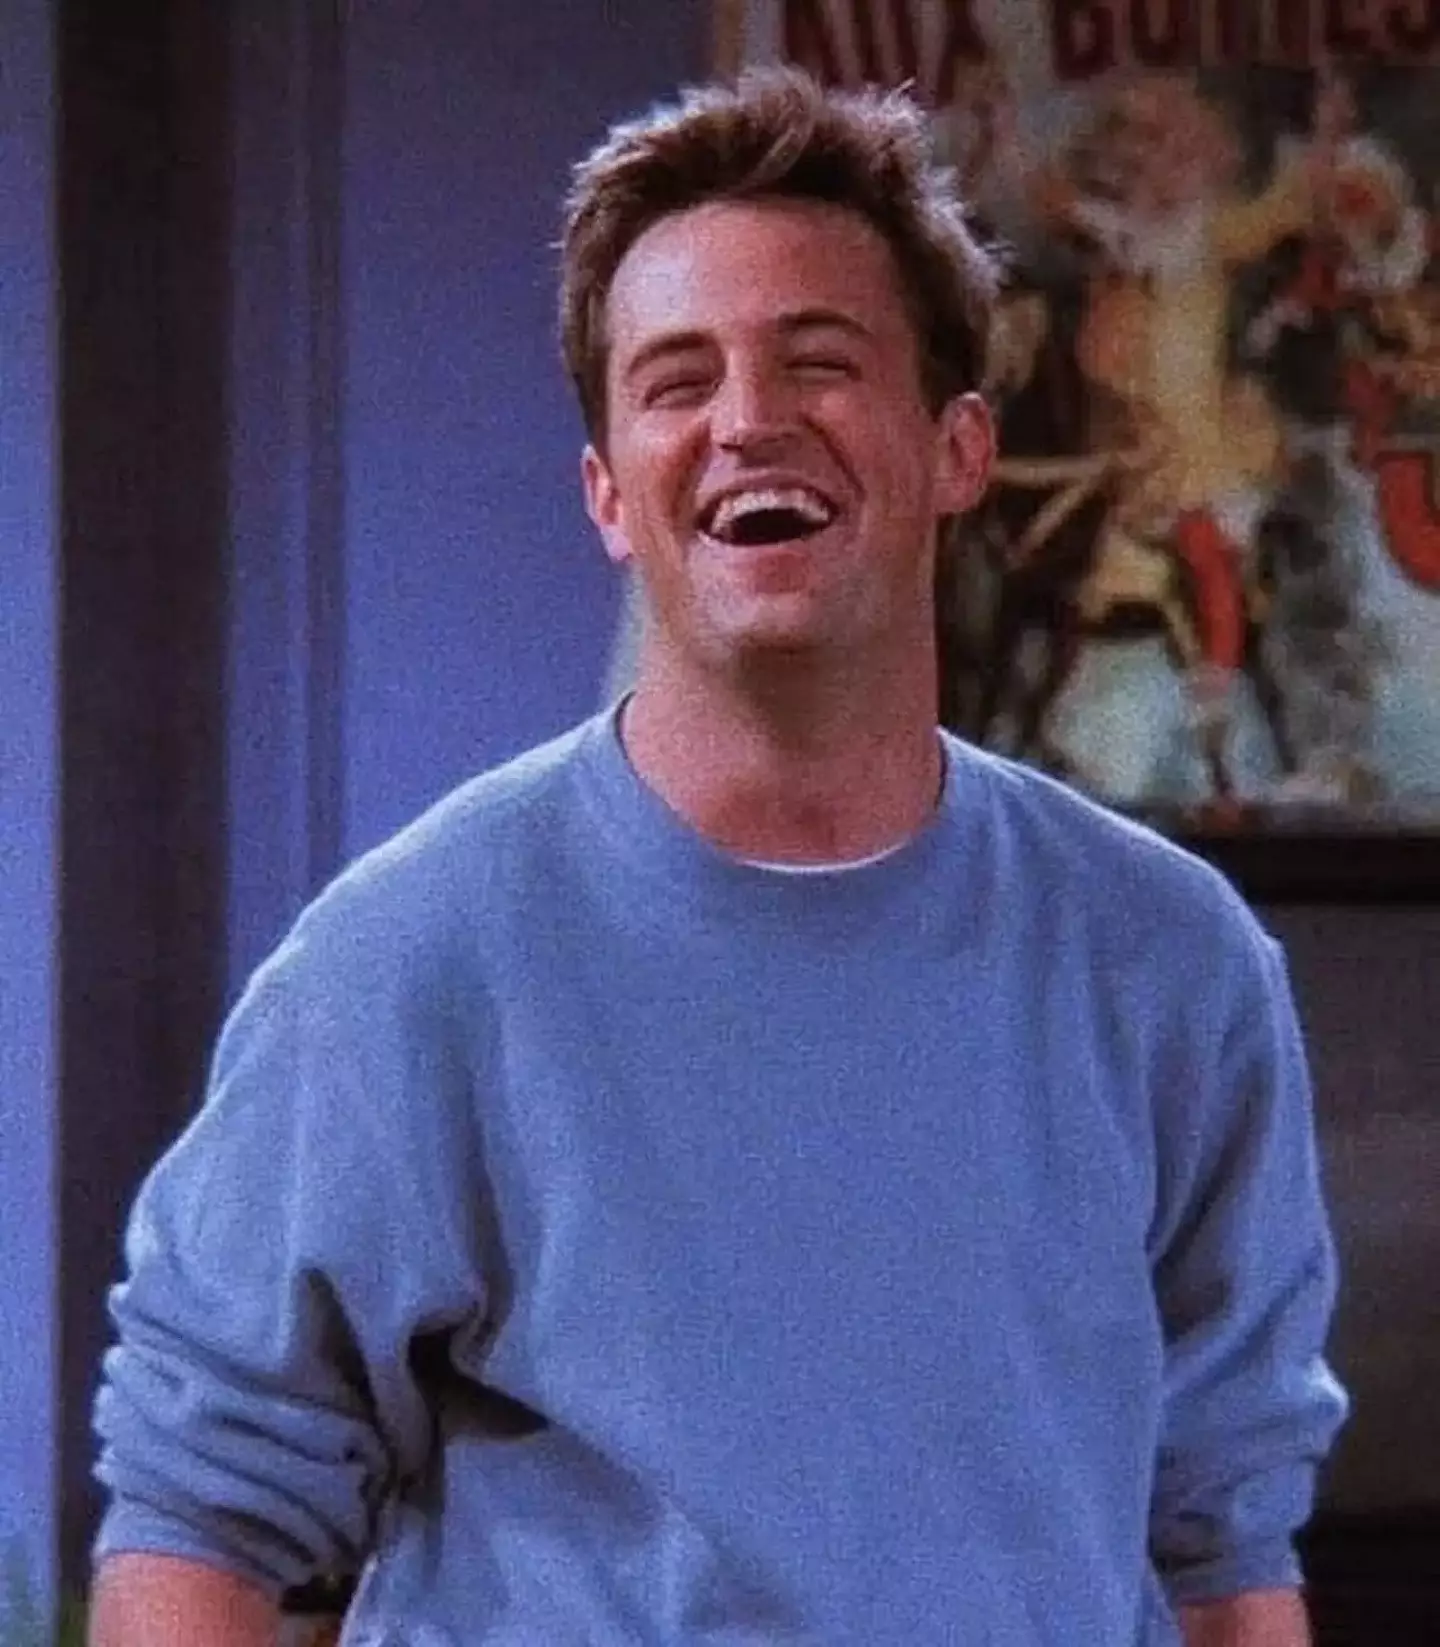 Matthew Perry died at the age of 54 last month.